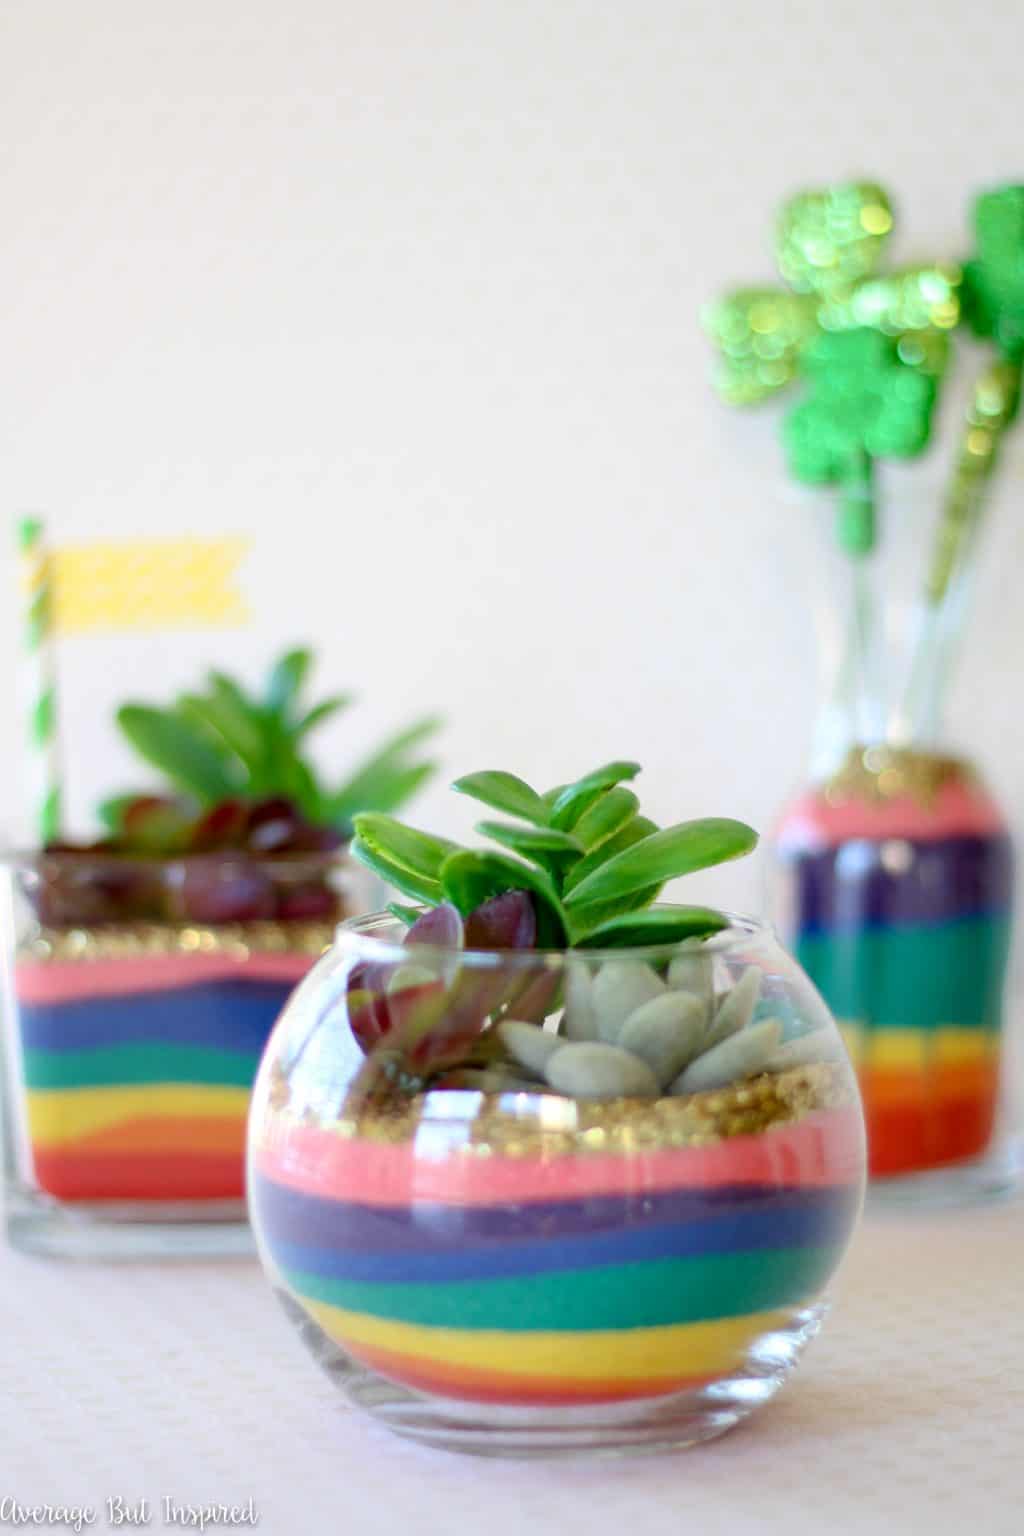 These Rainbow Sand Art Terrariums are sure to put a smile on anyone's face! Add a lot of color to glass vases with colored sand in rainbow hues! A perfect St. Patrick's Day craft for any age!